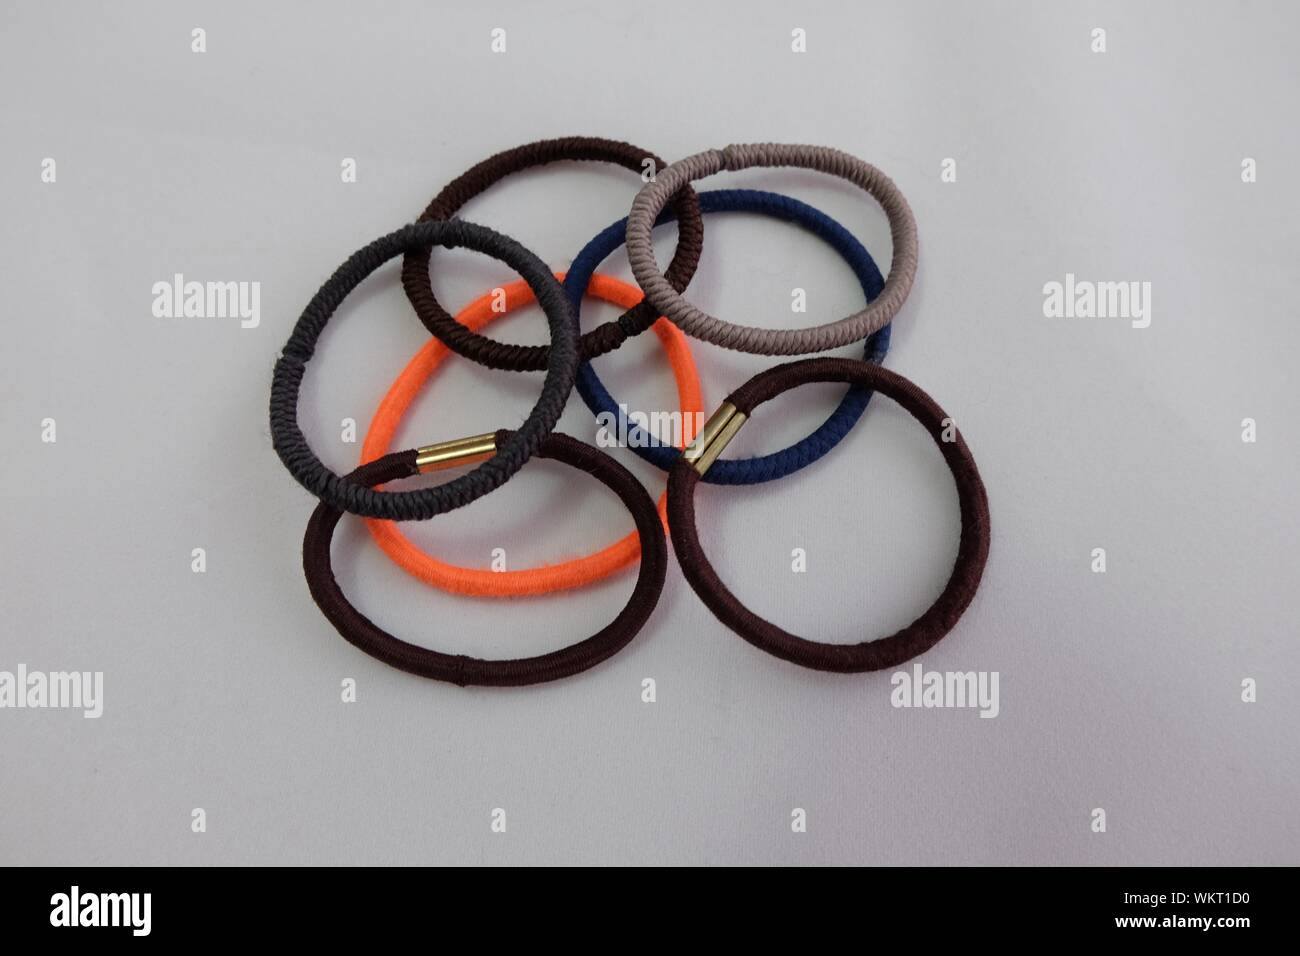 Close-up Of Hair Bands On White Background Stock Photo